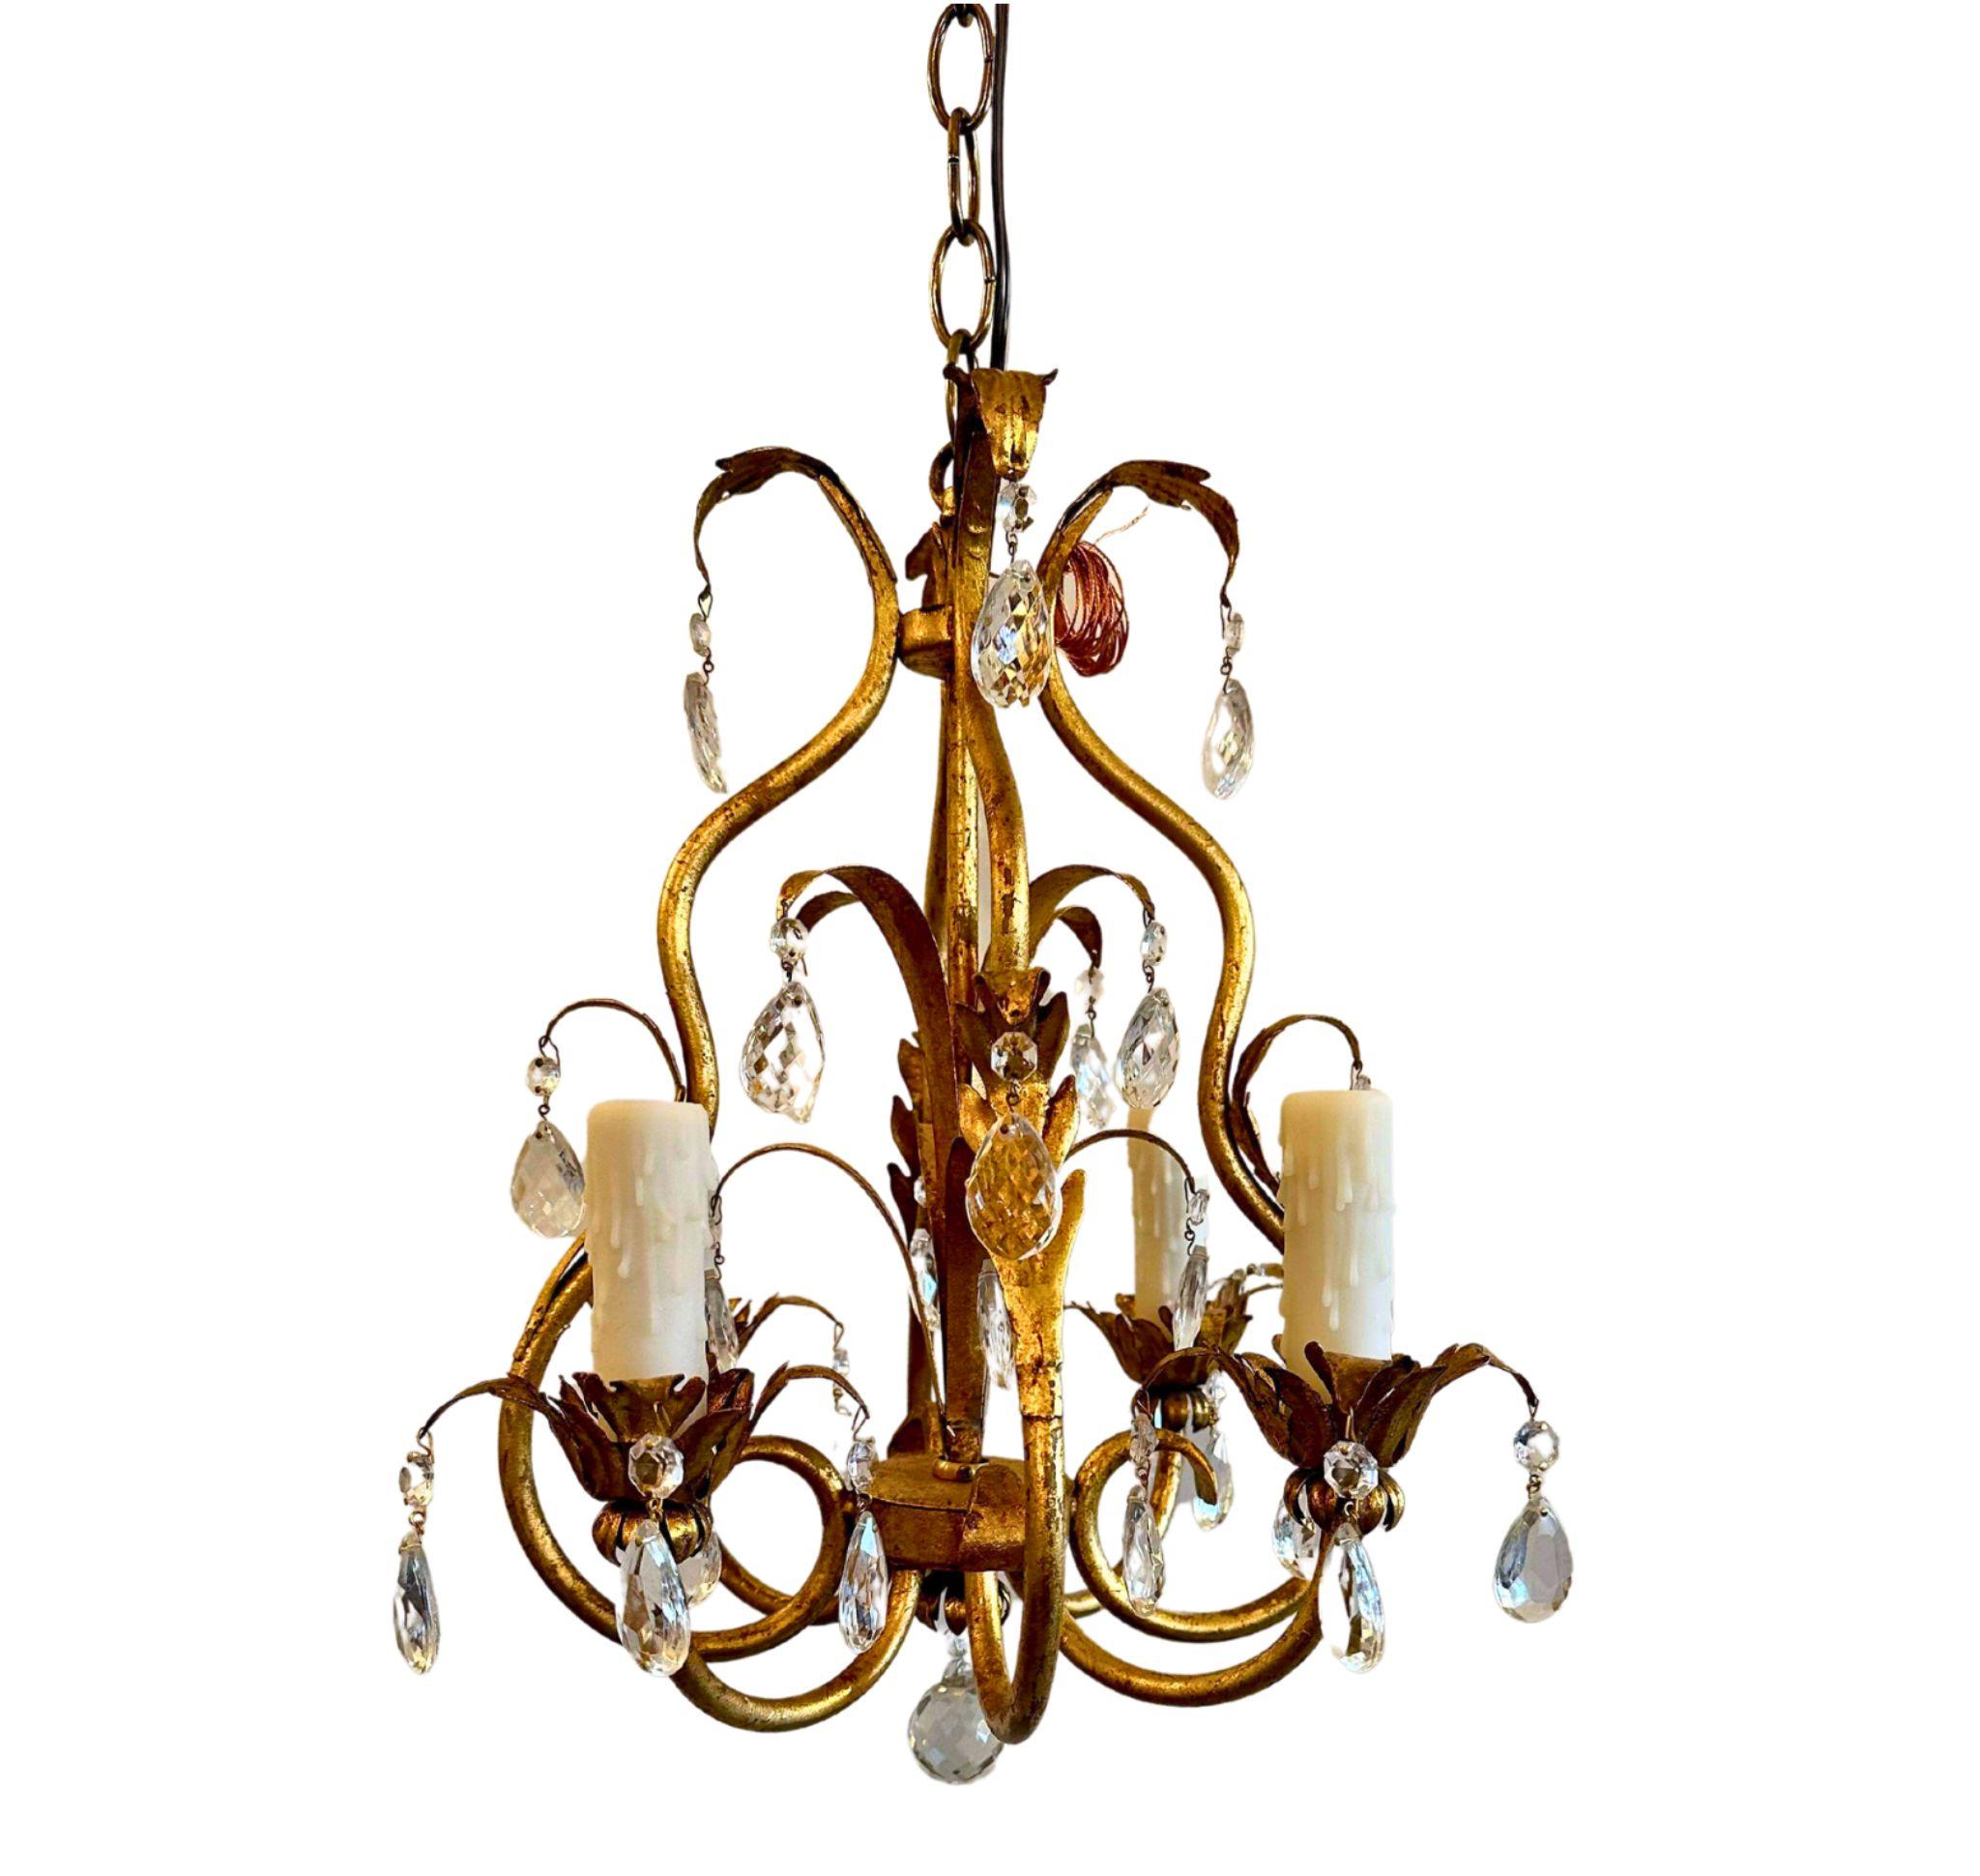 All original 1920s 4 light Italian gold chandelier with crystal